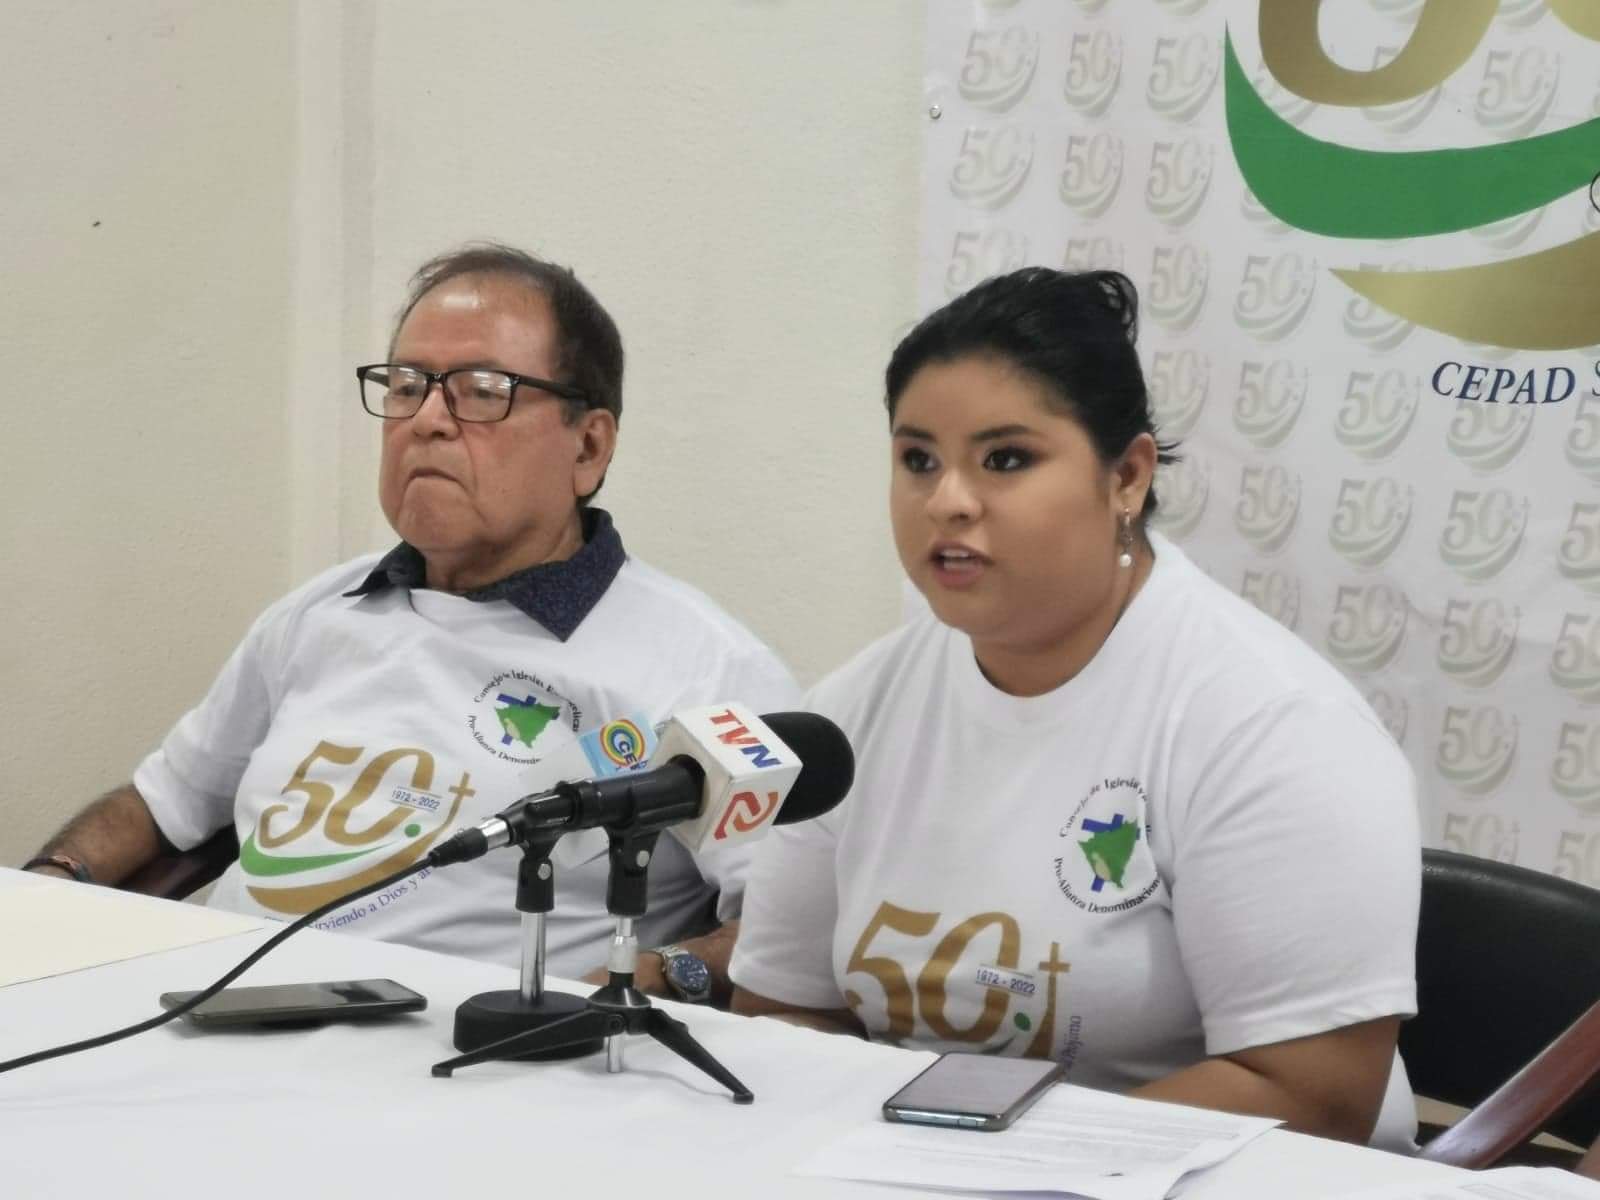 Emily Reyes and Evenor Jerez holding a press conference for CEPAD’s 50th Anniversary